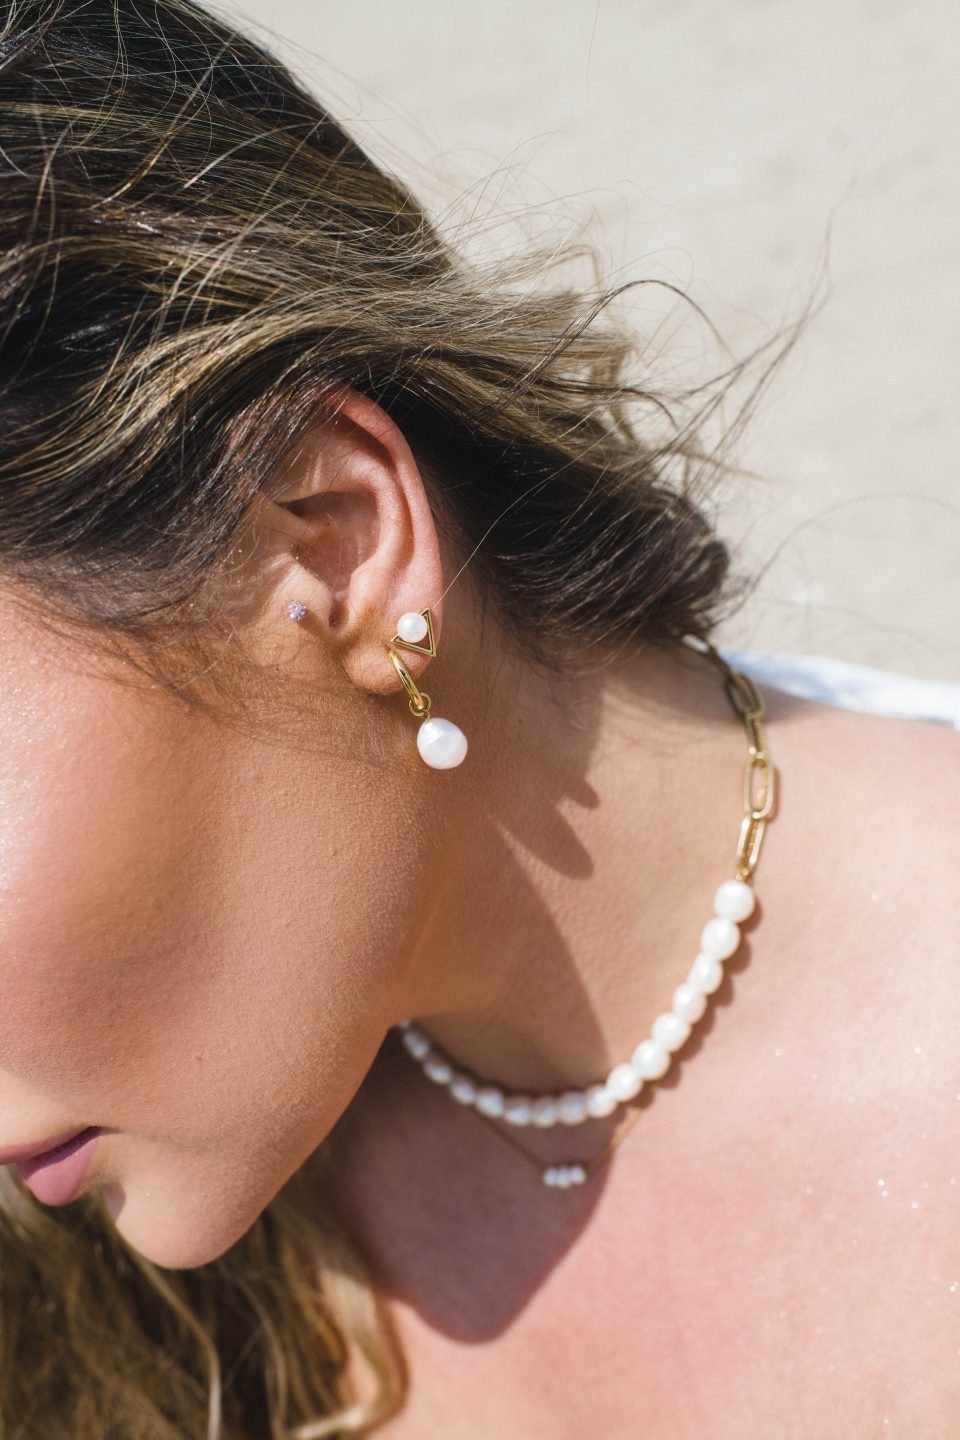 A person wearing  pearl drop earrings and a pearl necklace